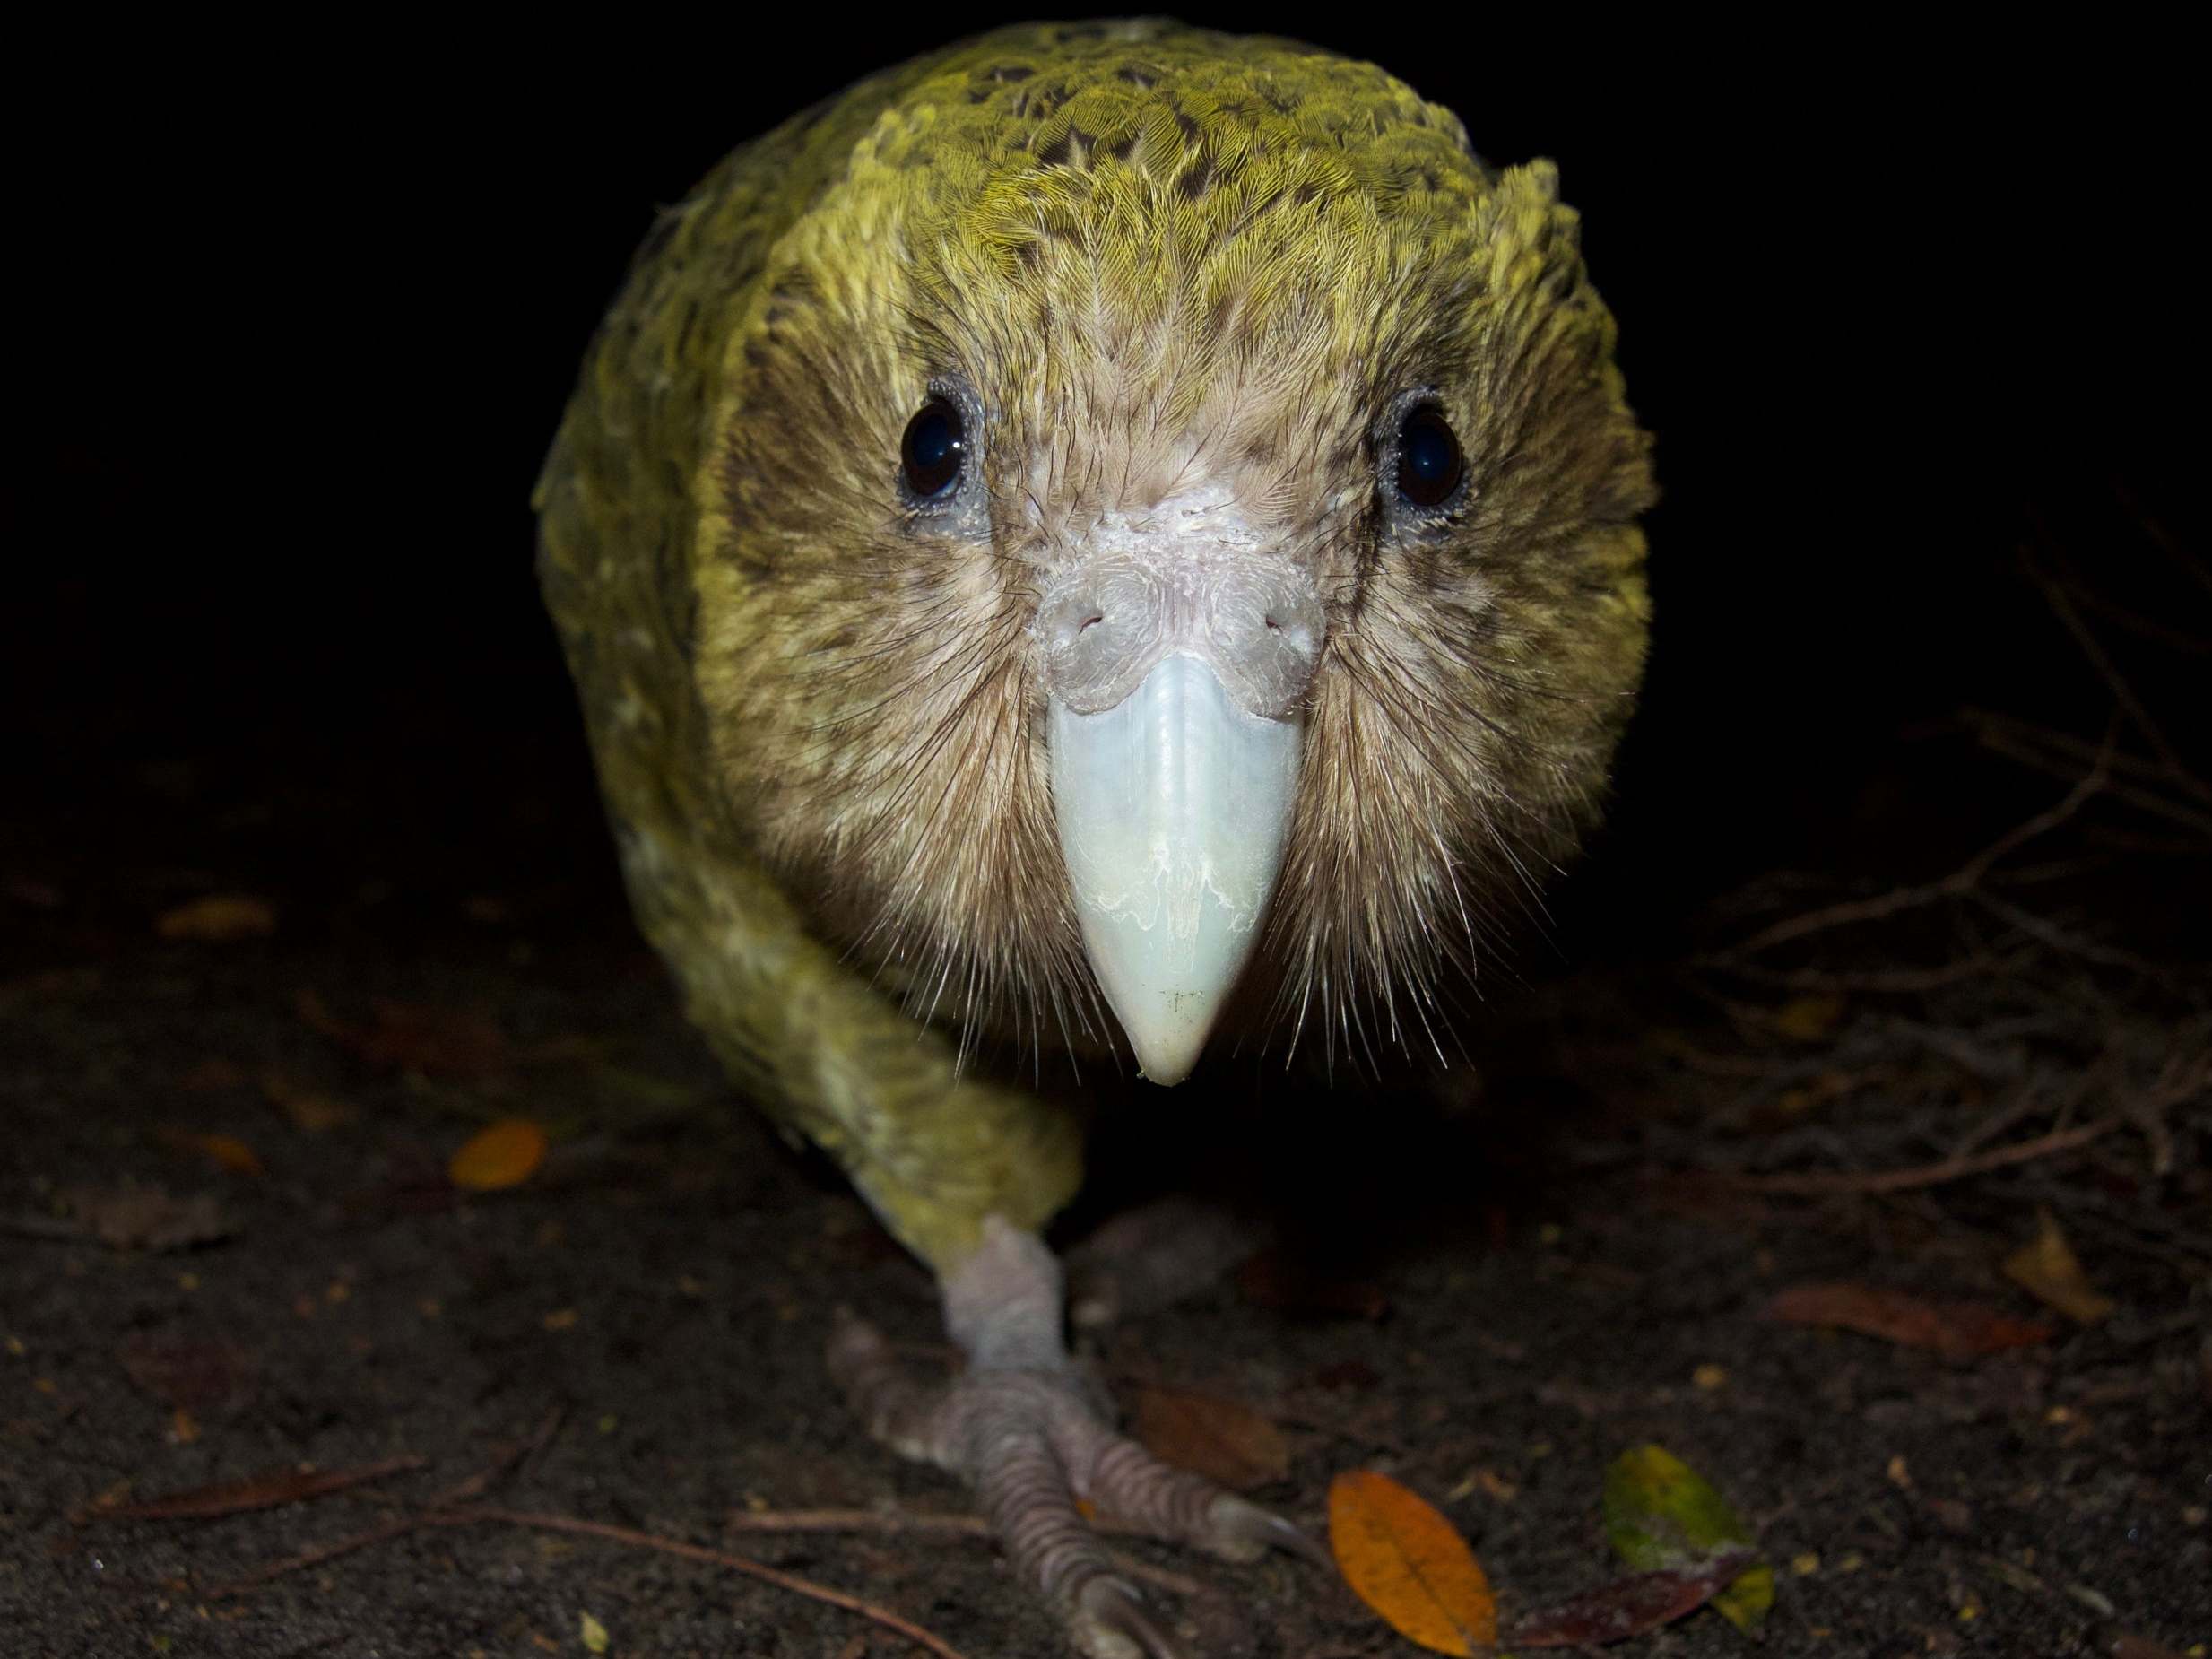 The critically endangered kakapo has enjoyed a record breaking breeding season – but a fungal infection is now putting the parrot’s survival at risk (AFP/Getty Images)